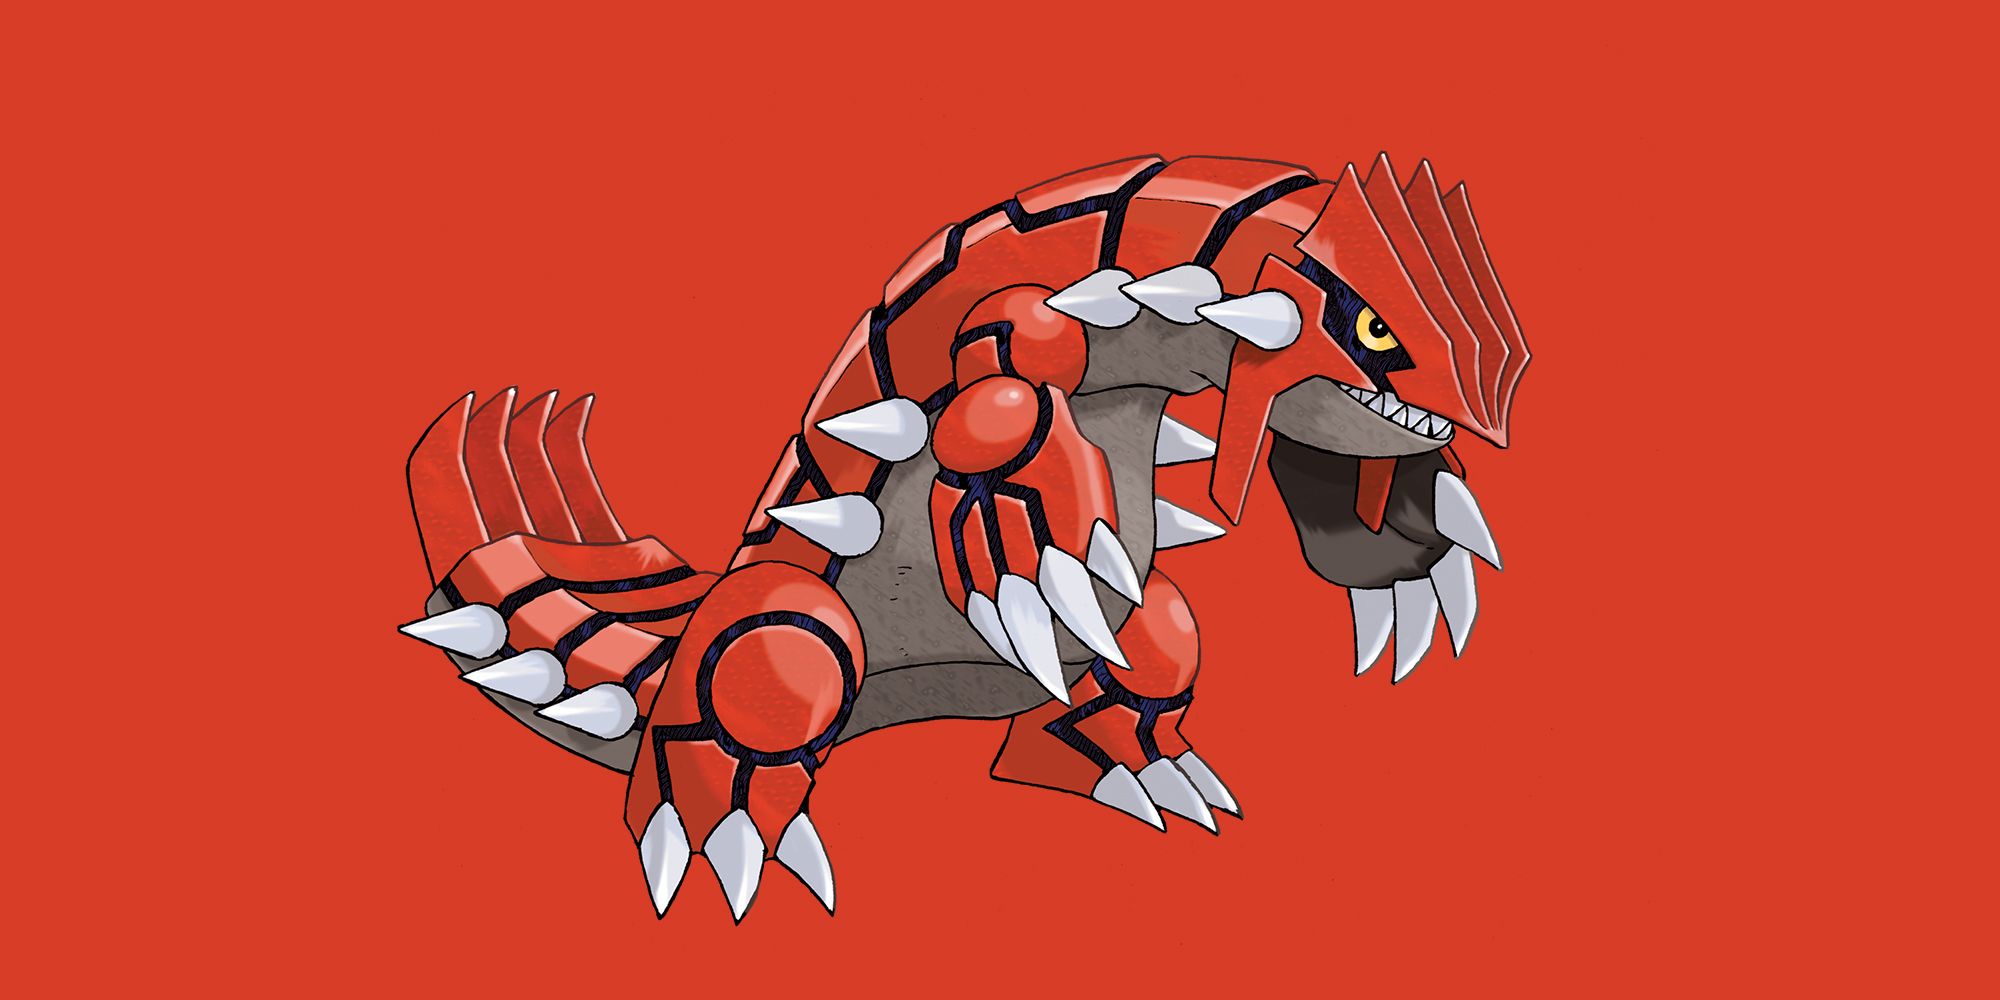 Groudon on a red background in Pokemon